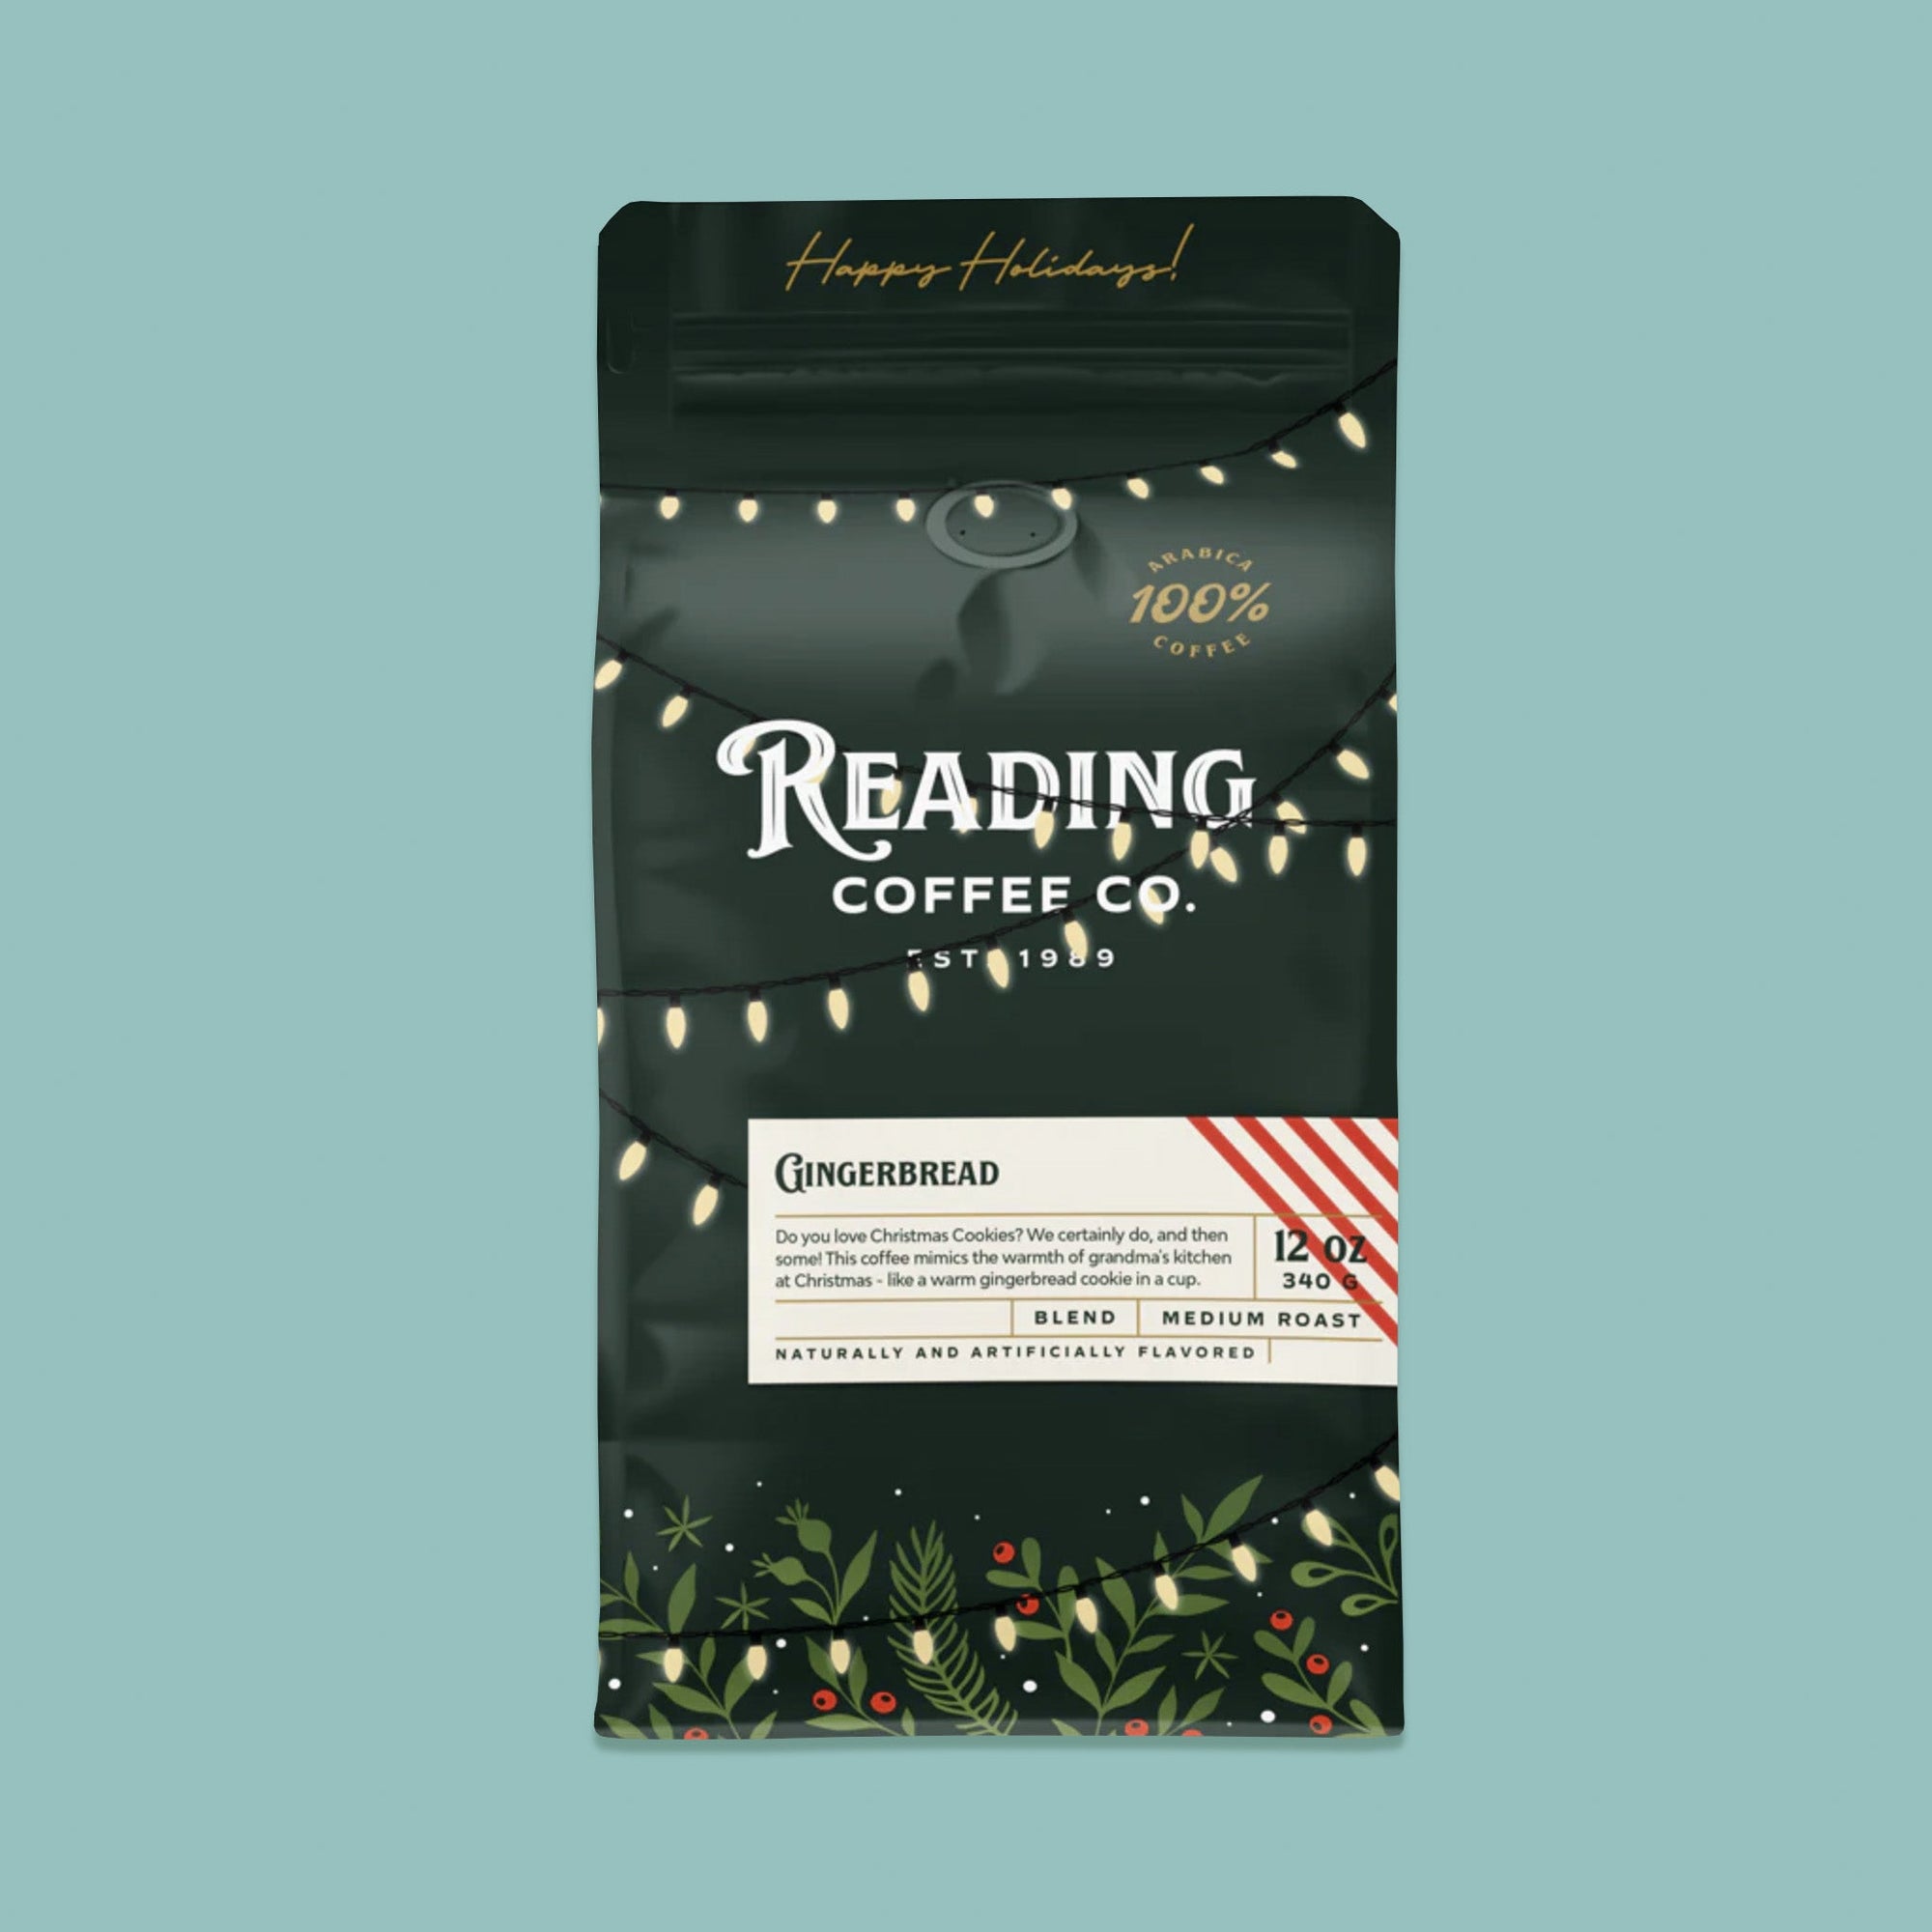 On a sage green background sits a dark green package of coffee. This package is gold, white, and dark green lettering. There are swags of lights and greenery with berries. It says "Happy Holidays!", "Reading Coffee Co. Est. 1989", "Gingerbread Blend Medium Roast." It is '100% Arabica Coffee. It also says "Do you love Christmas Cookies? We certanily do, and then some! This coffee mimics the warmth of Grandma's kitchen at Christmas - like a warm gingerbread cookie in a cup." 12 oz 340g